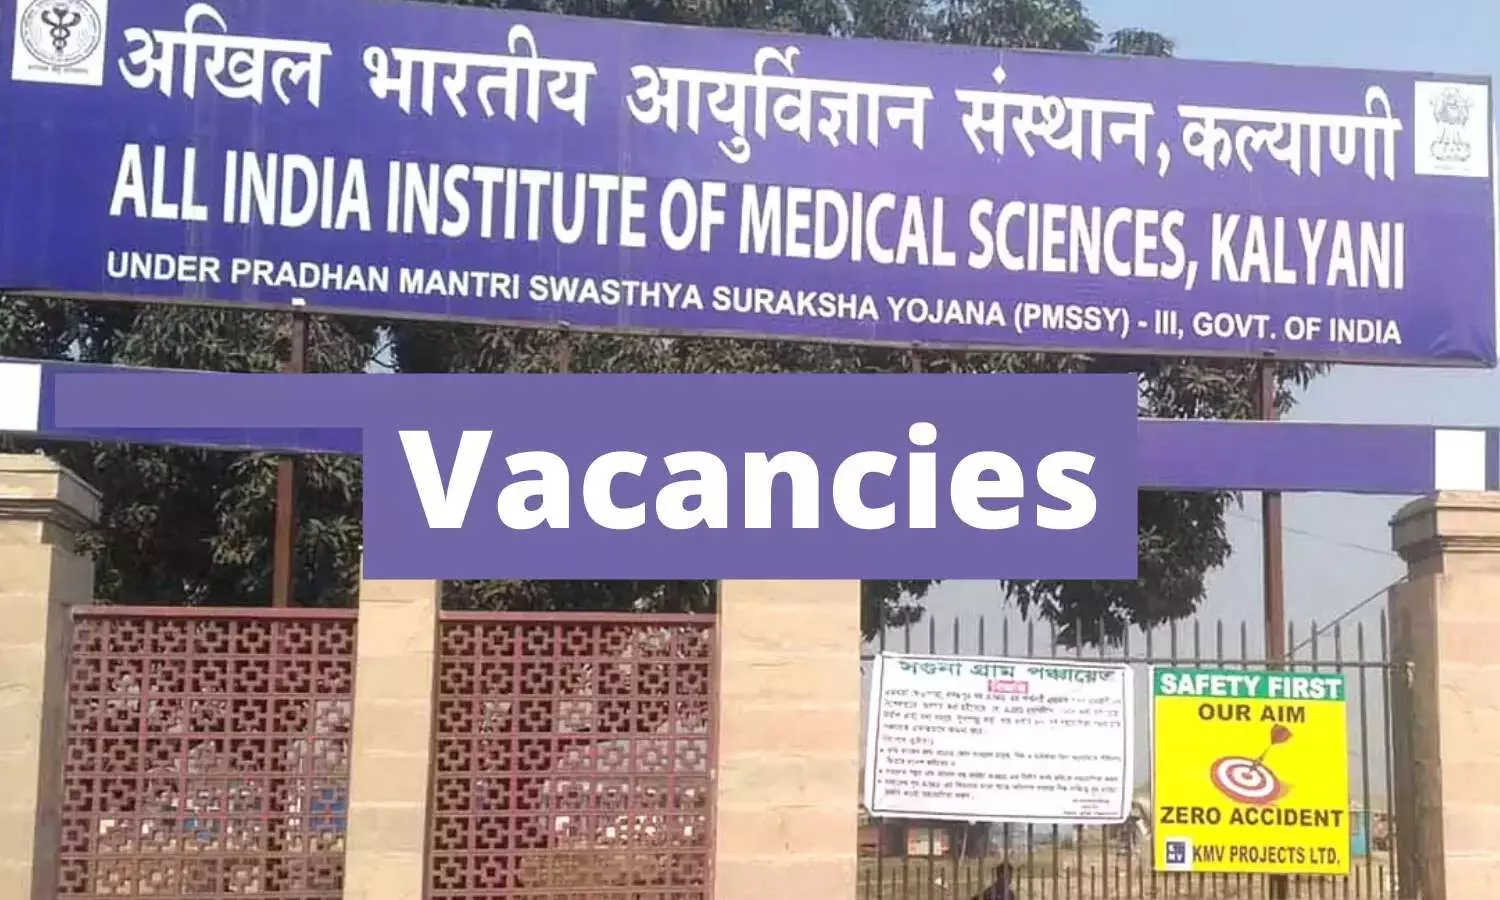 Vacancies At AIIMS Kalyani: Walk In Interview For Senior Resident Post, Apply Now